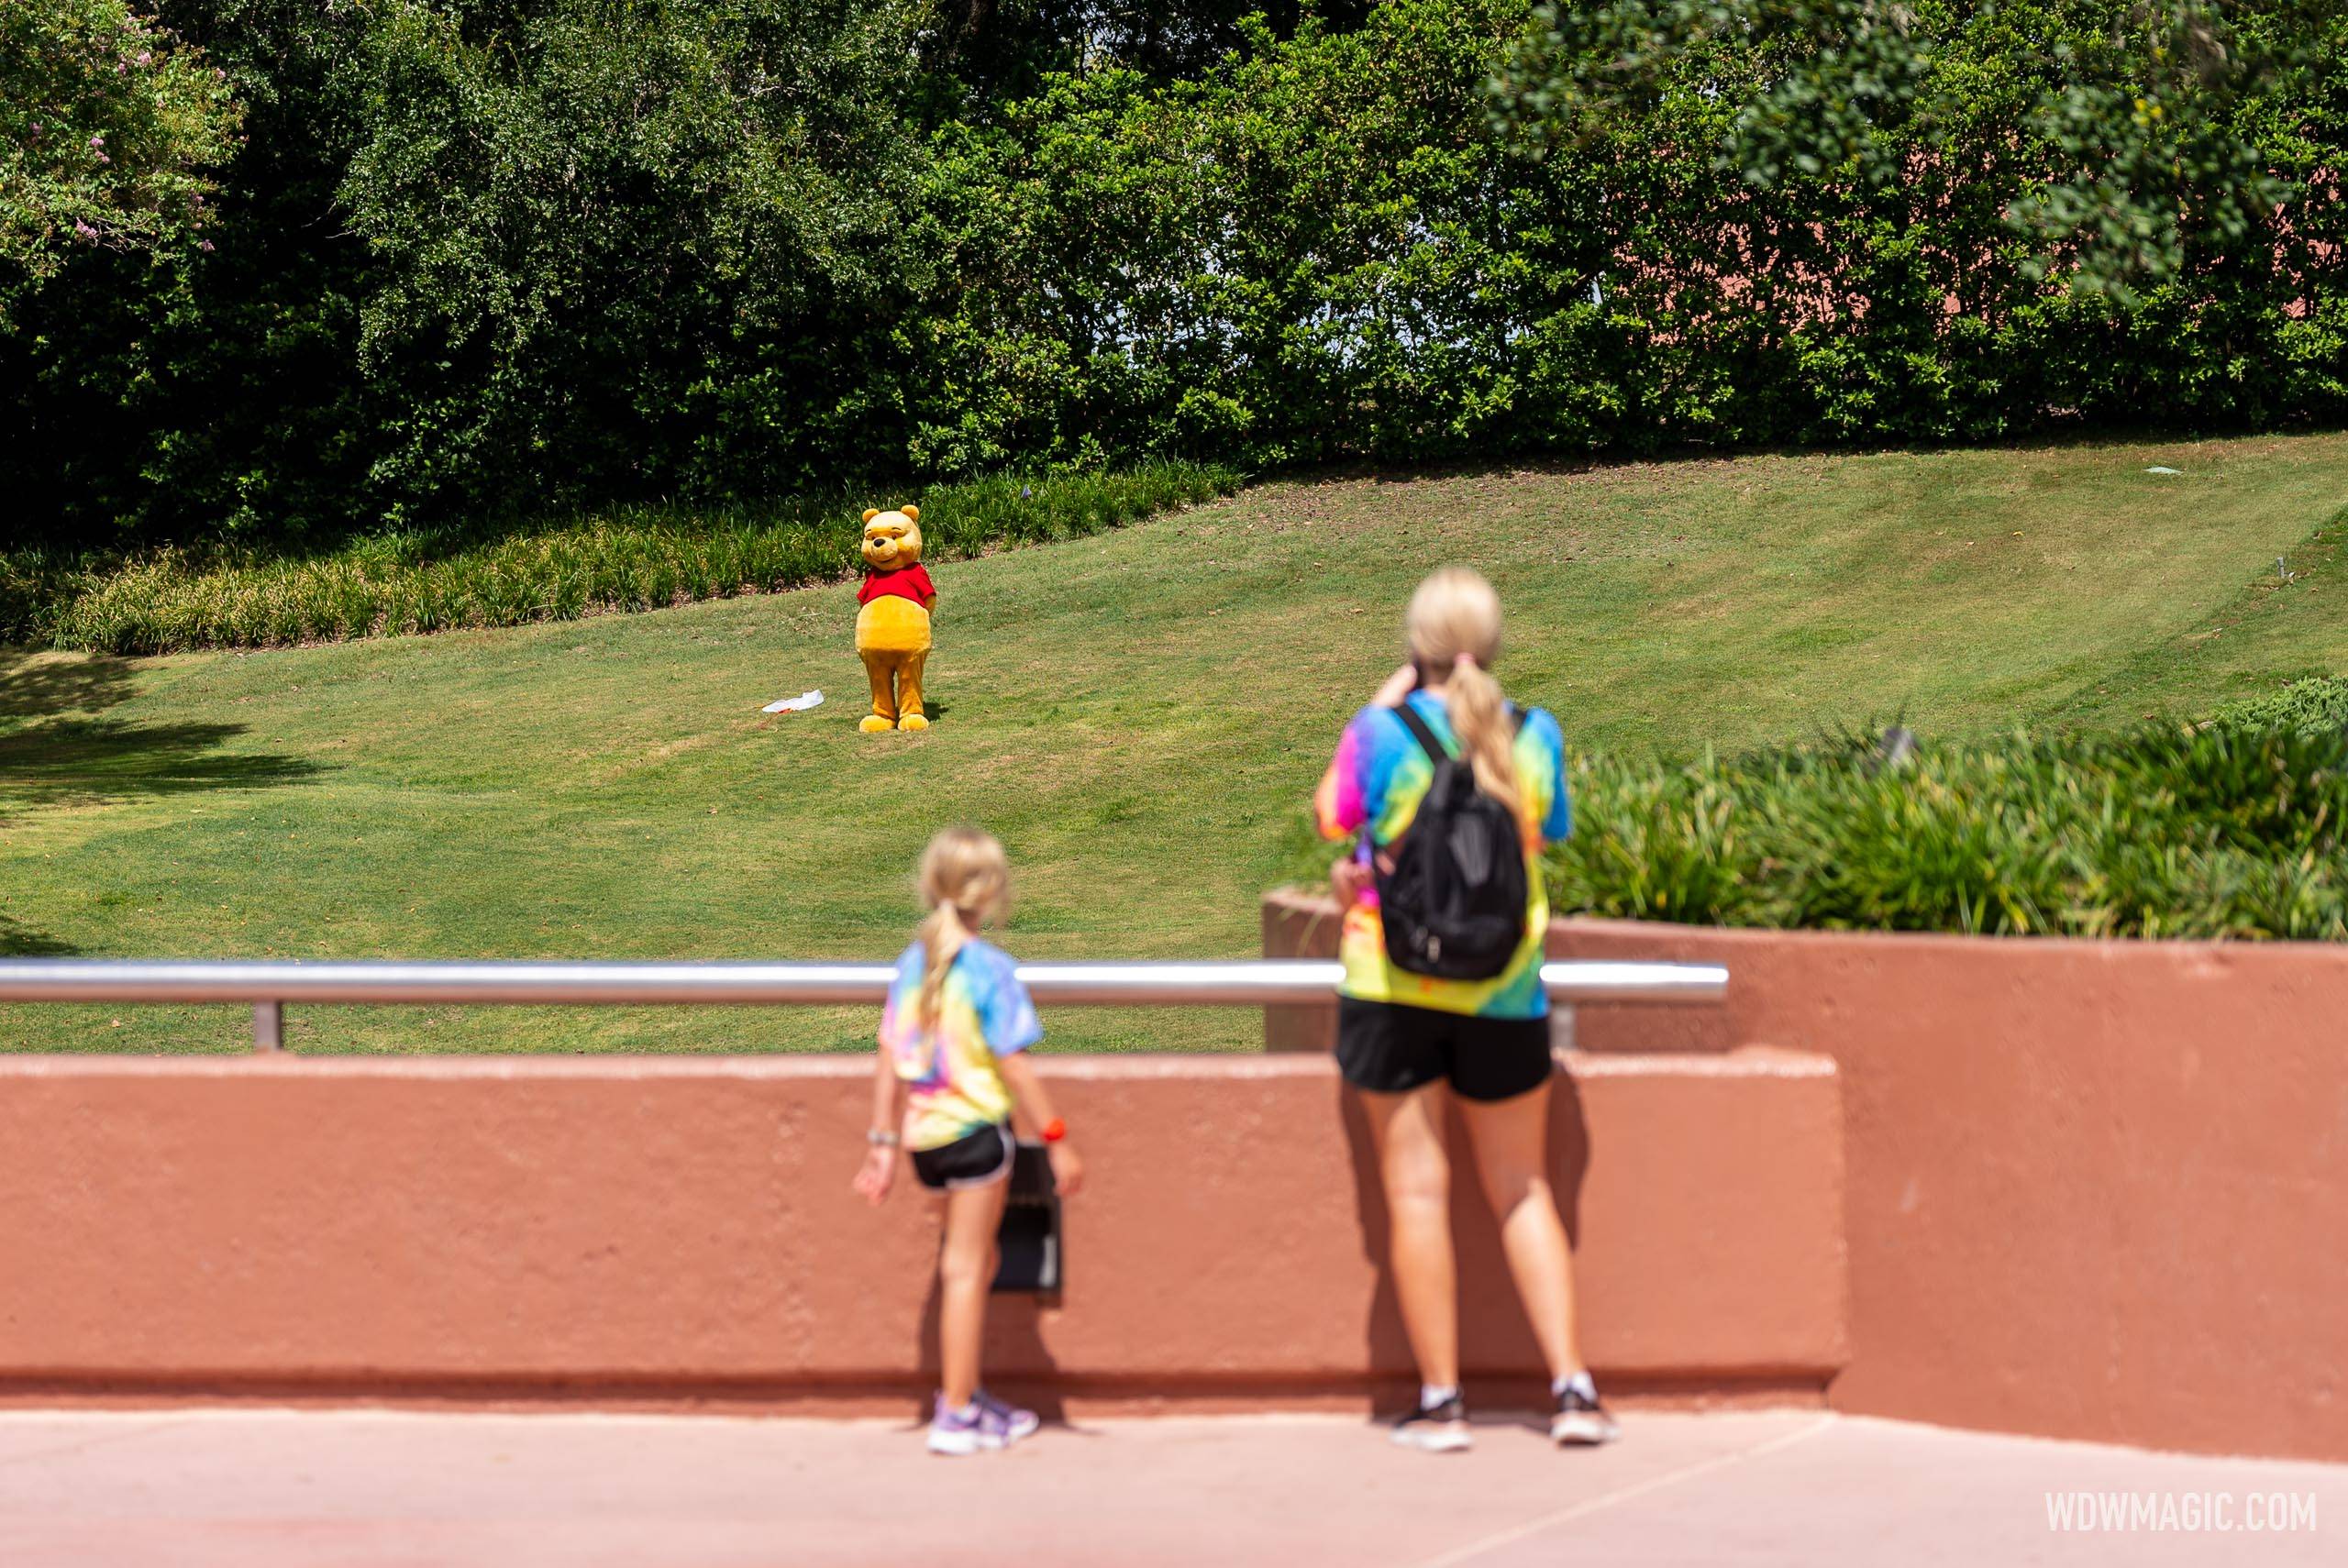 Winnie the Pooh character sighting in World Celebration at EPCOT